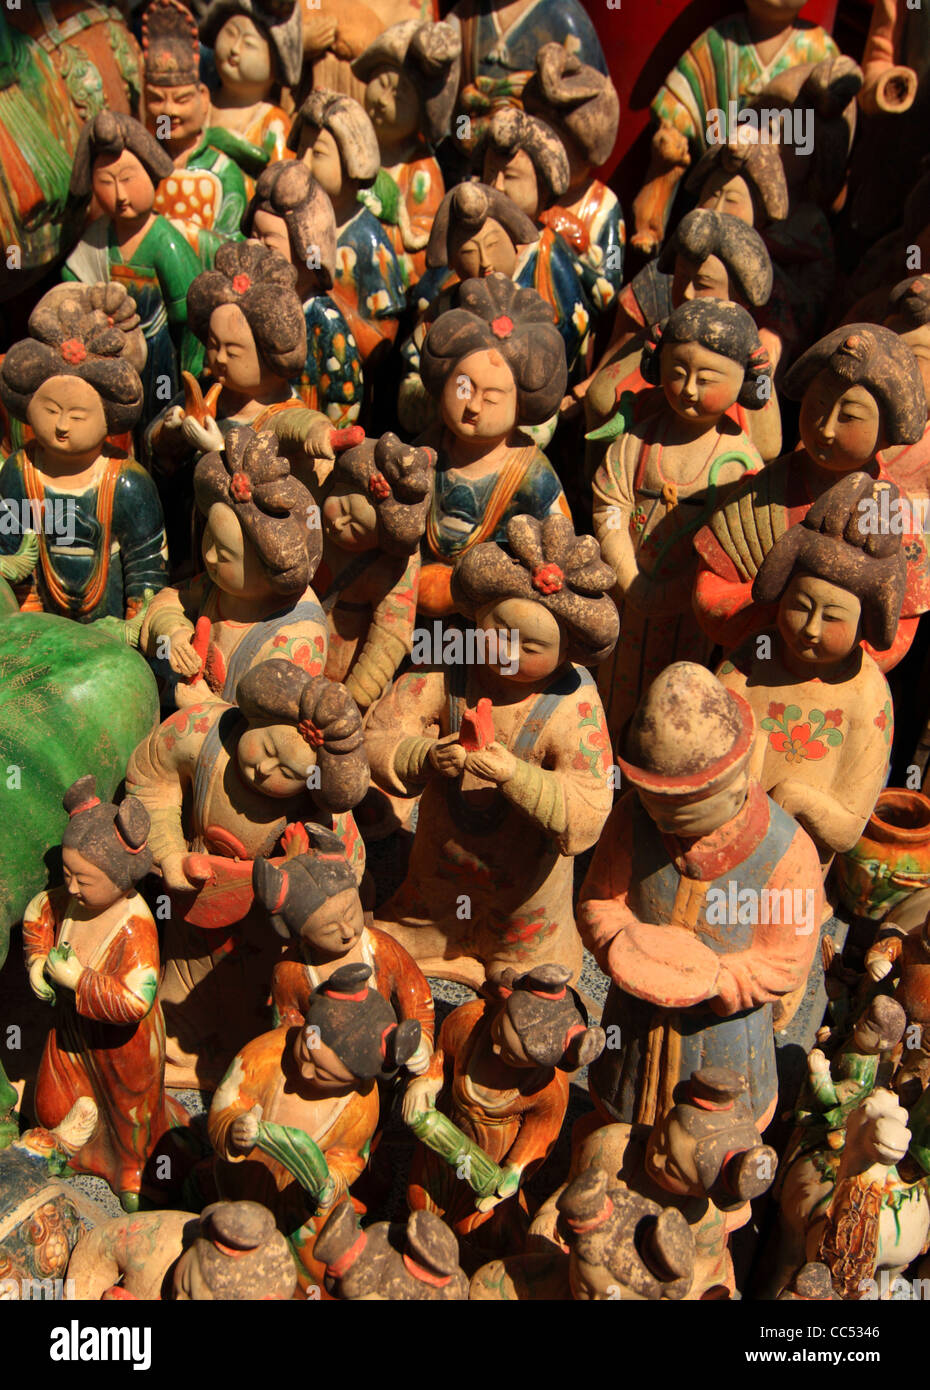 Tang Dynasty Tri-colored glazed figurines for sell, Panjiayuan Antique Market, Beijing, China Stock Photo